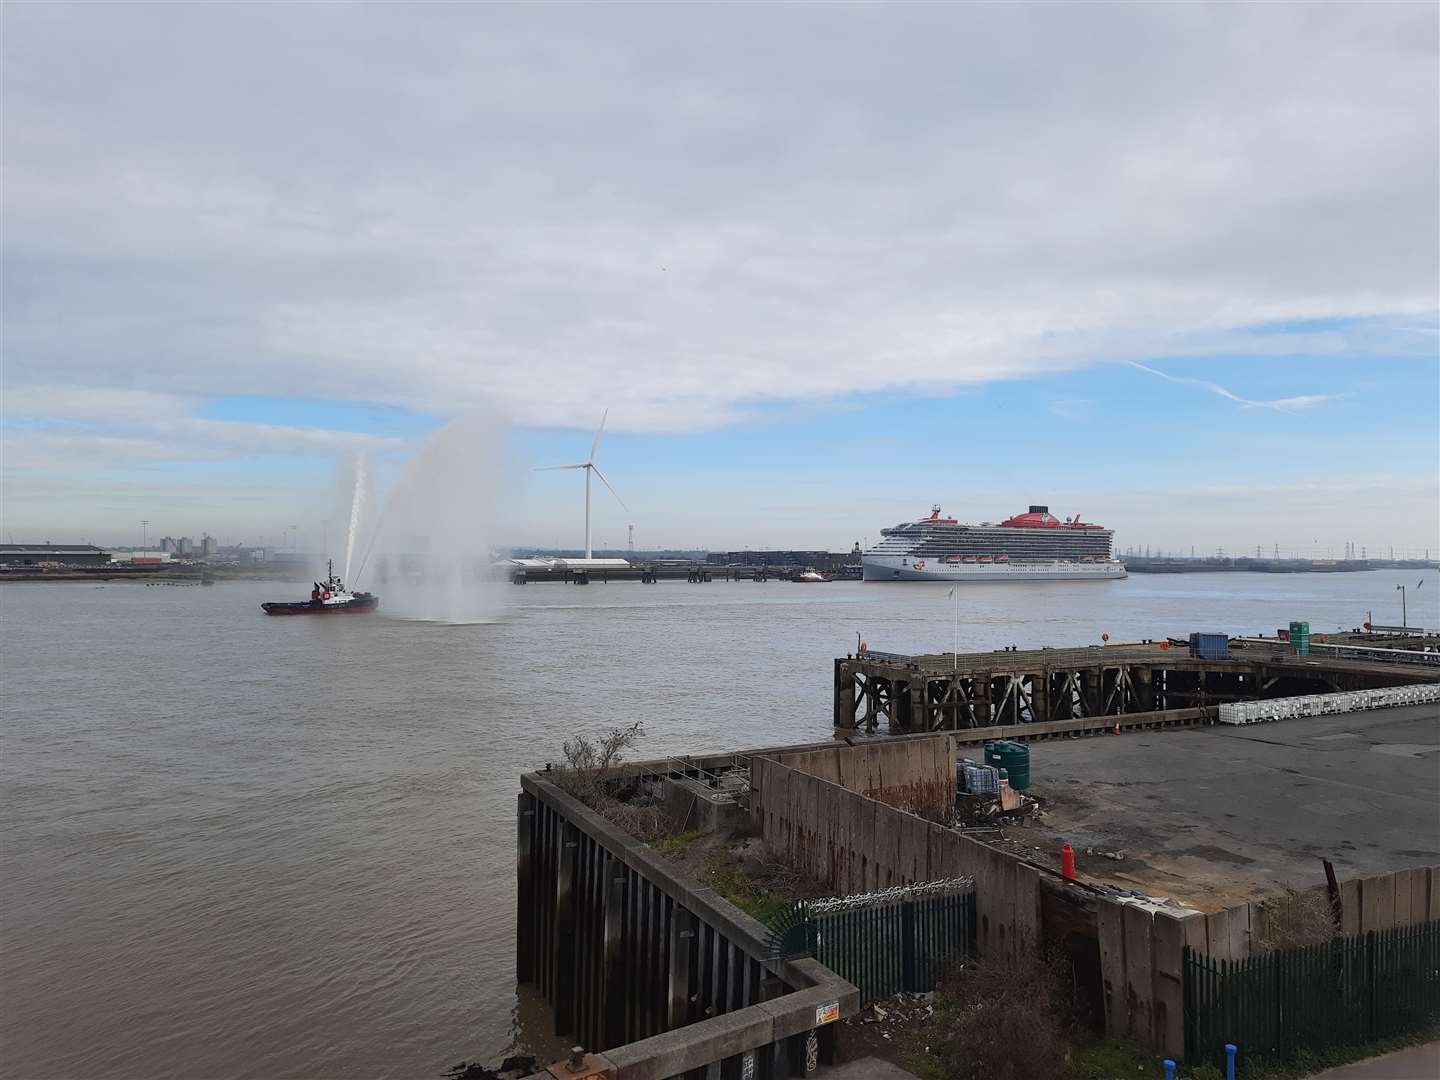 The new Virgin Voyages cruise ship Valiant Lady docking at Tilbury seen from across the river in Gravesend. Picture: Craig D